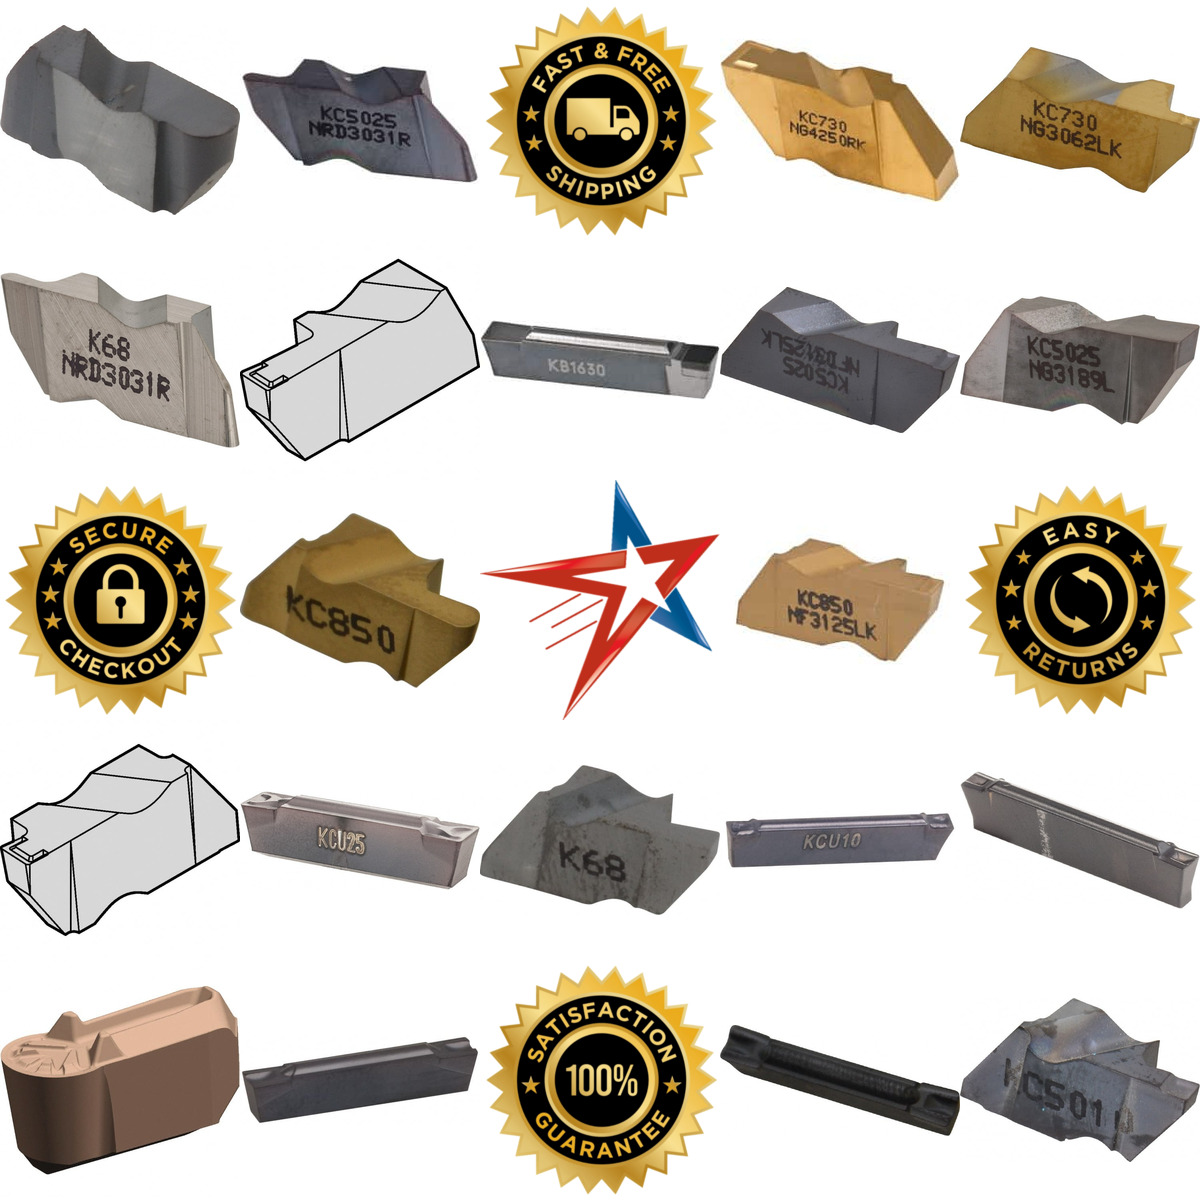 A selection of Kennametal products on GoVets